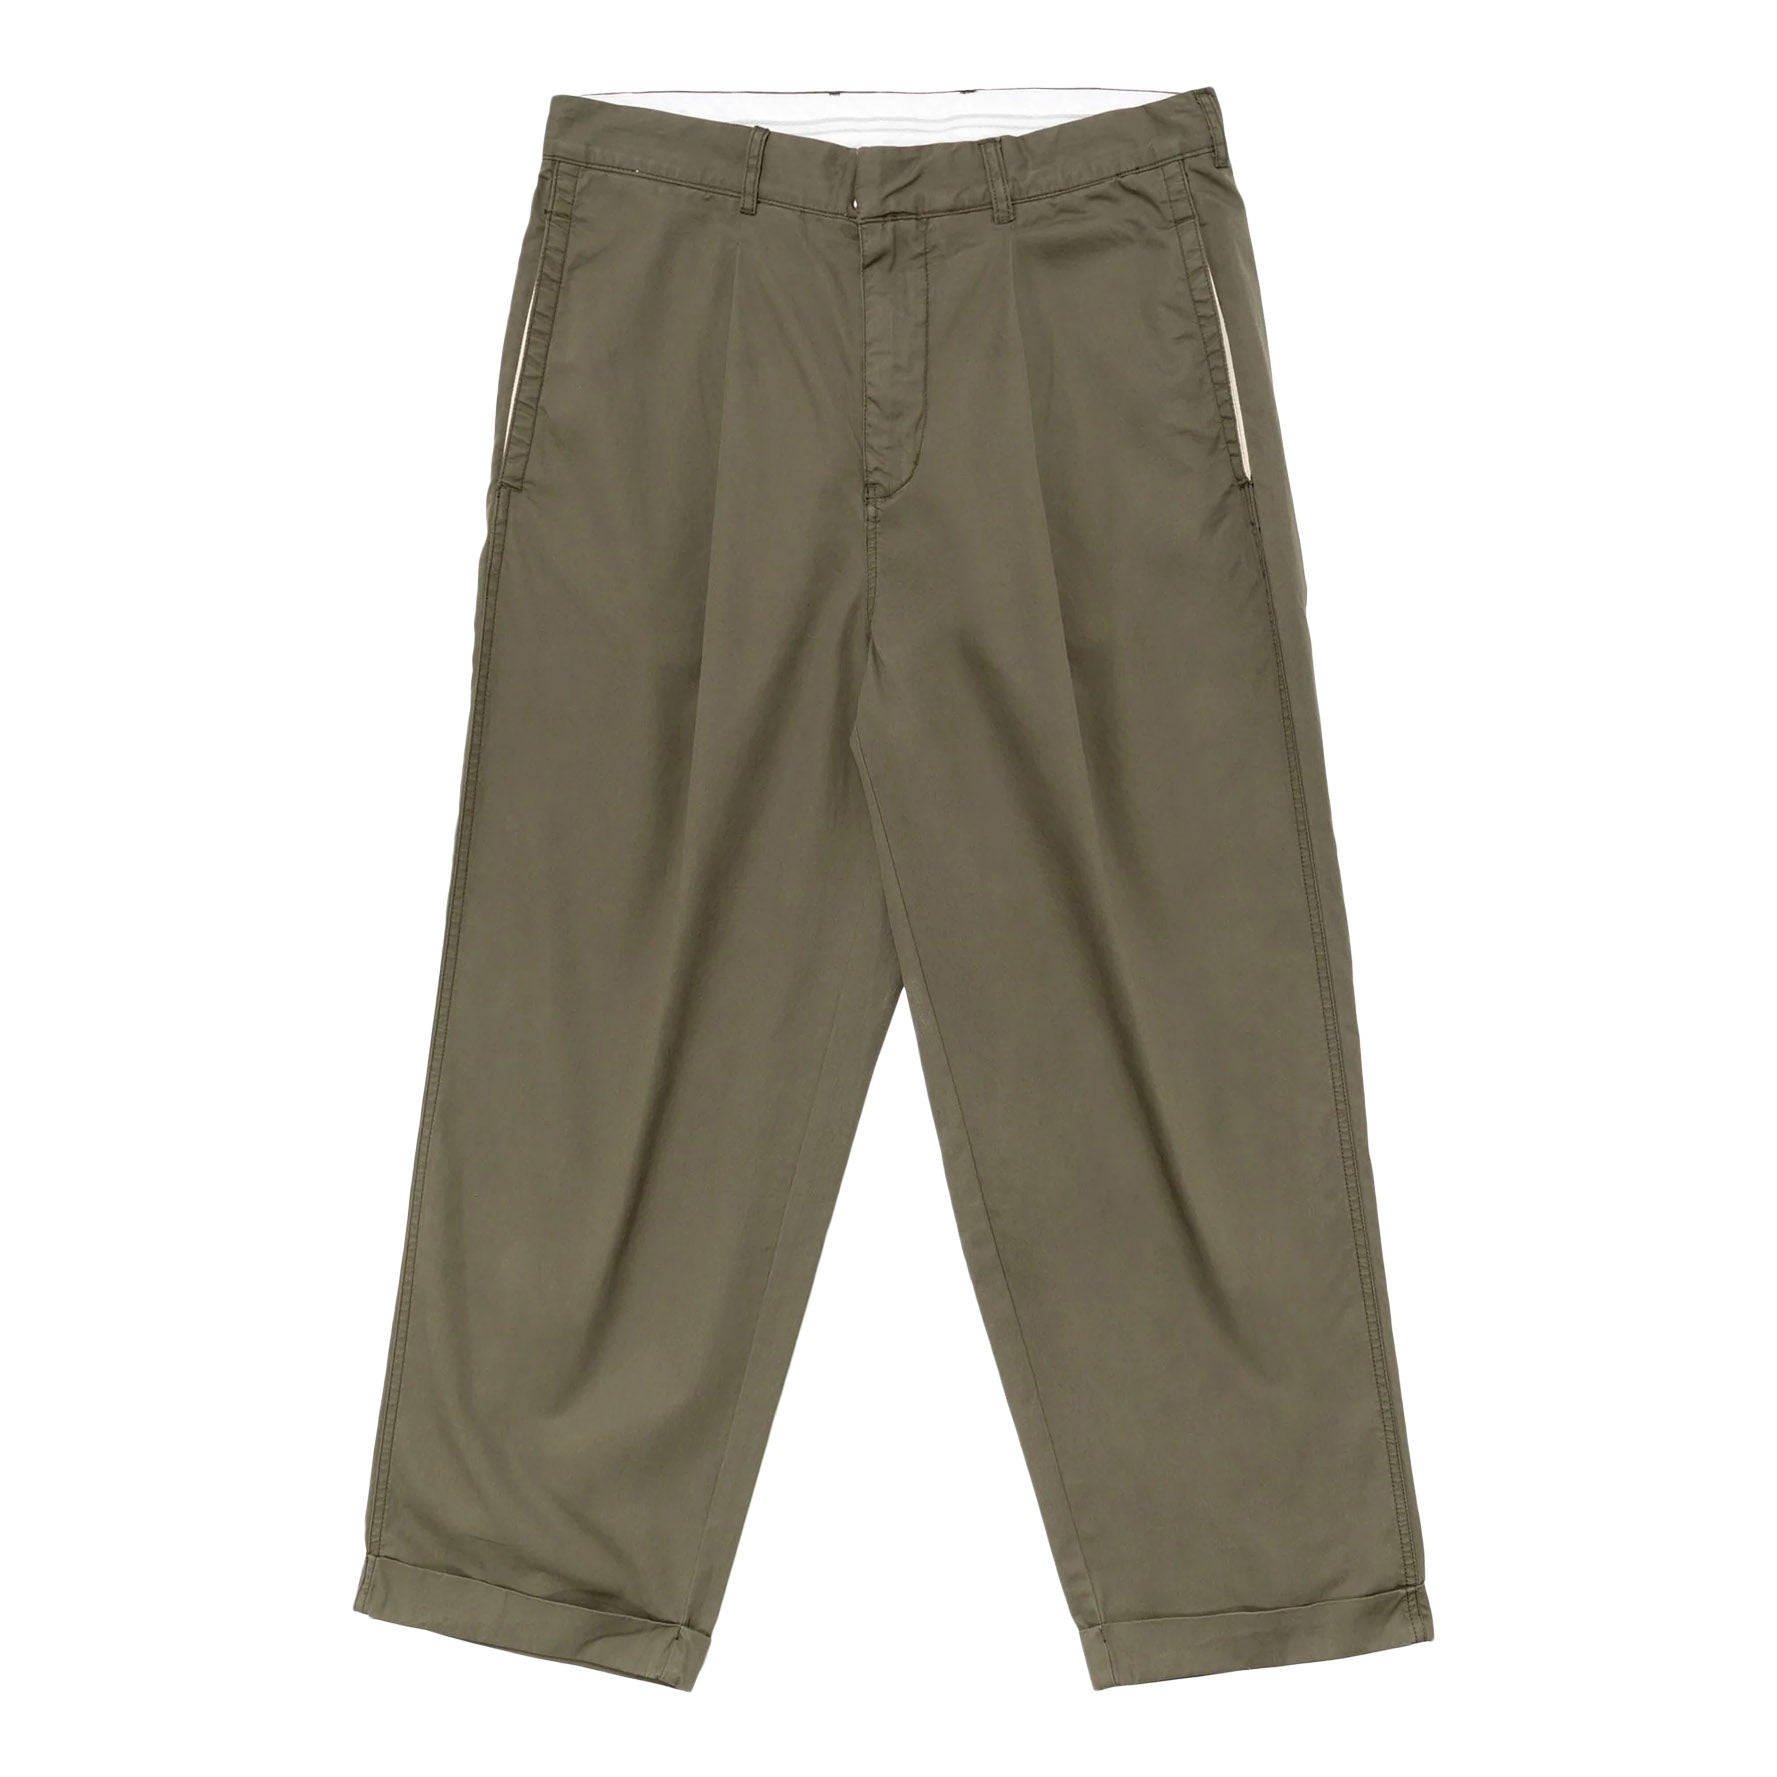 Garbstore Men Manager Pleated Pant Olive ()